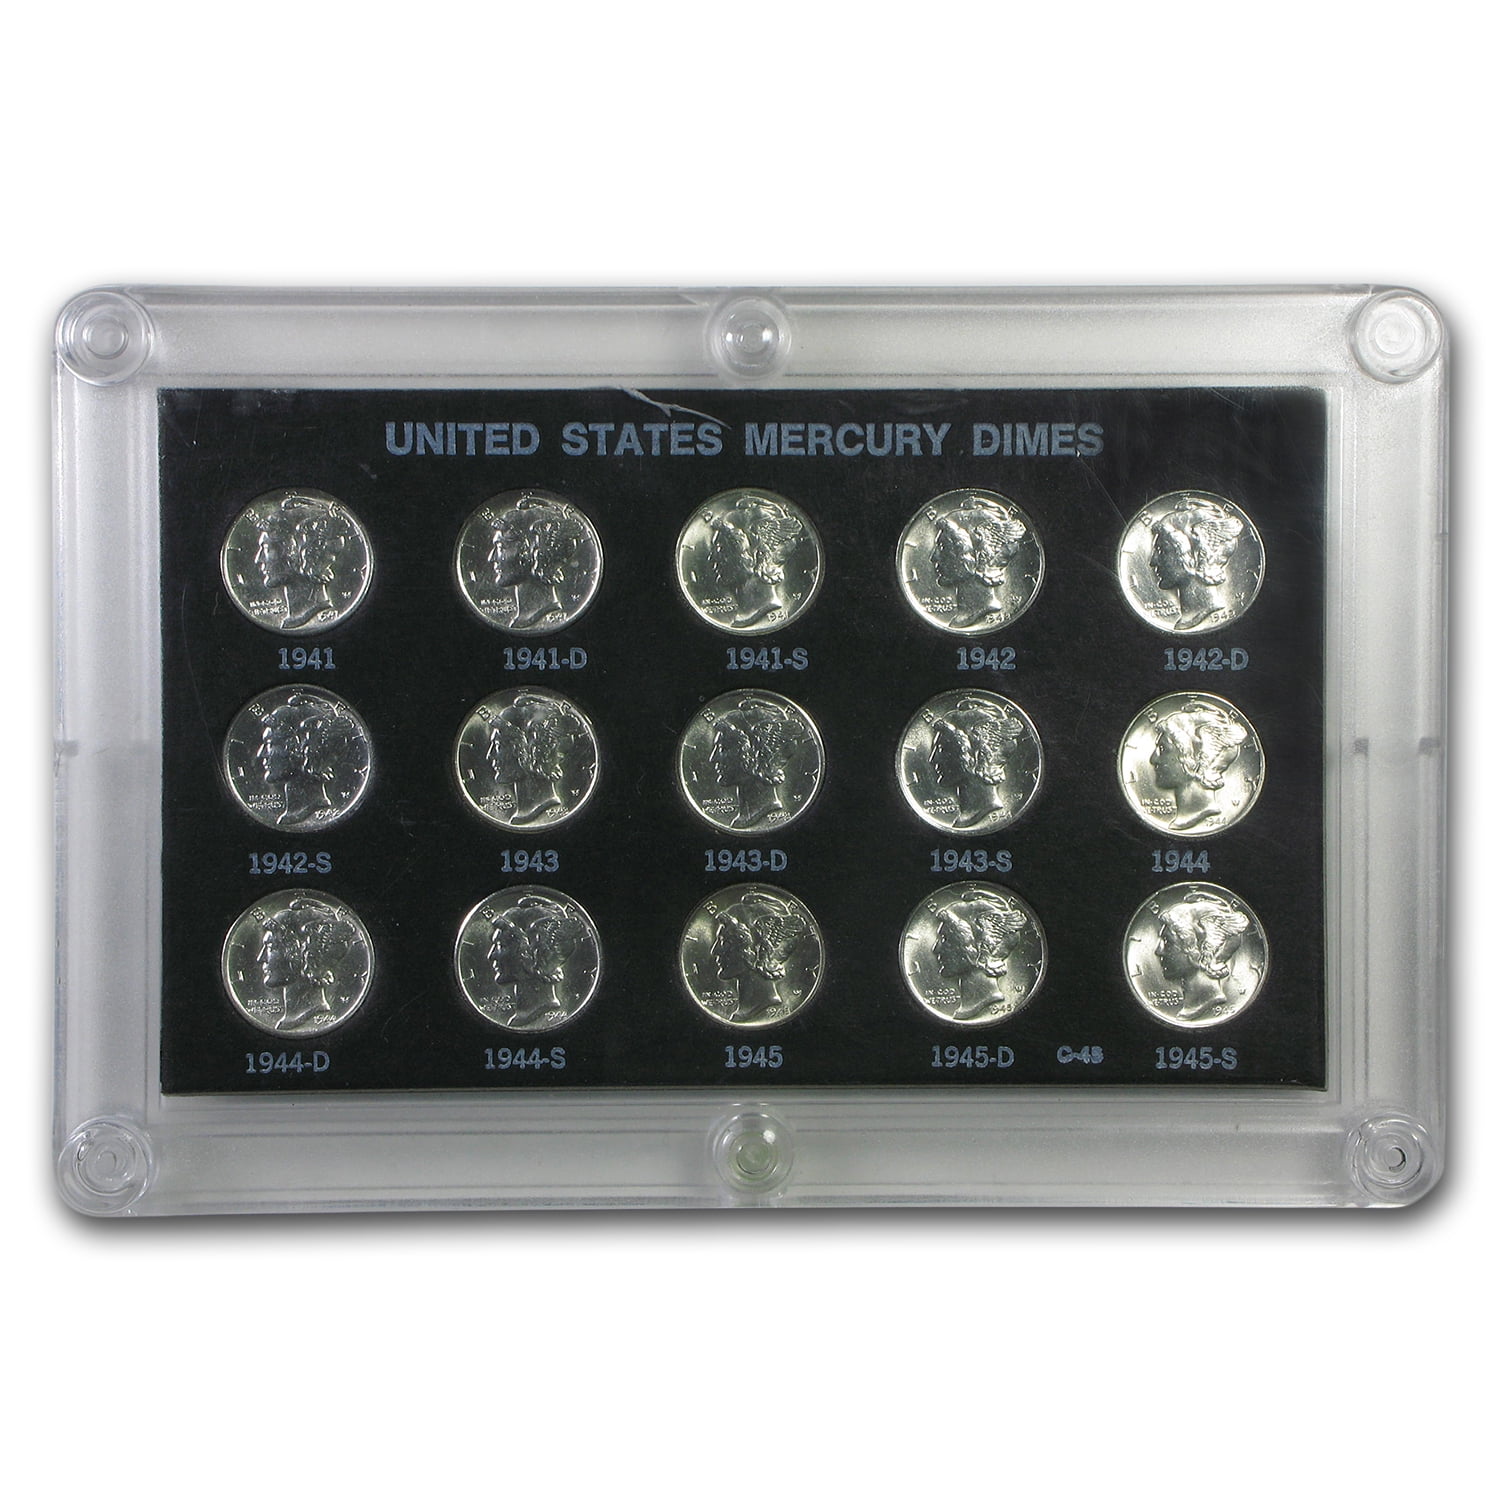 Capital Holder Coin Display Plastic Case For Mercury Dimes 1941 1945s WW2 Meteor